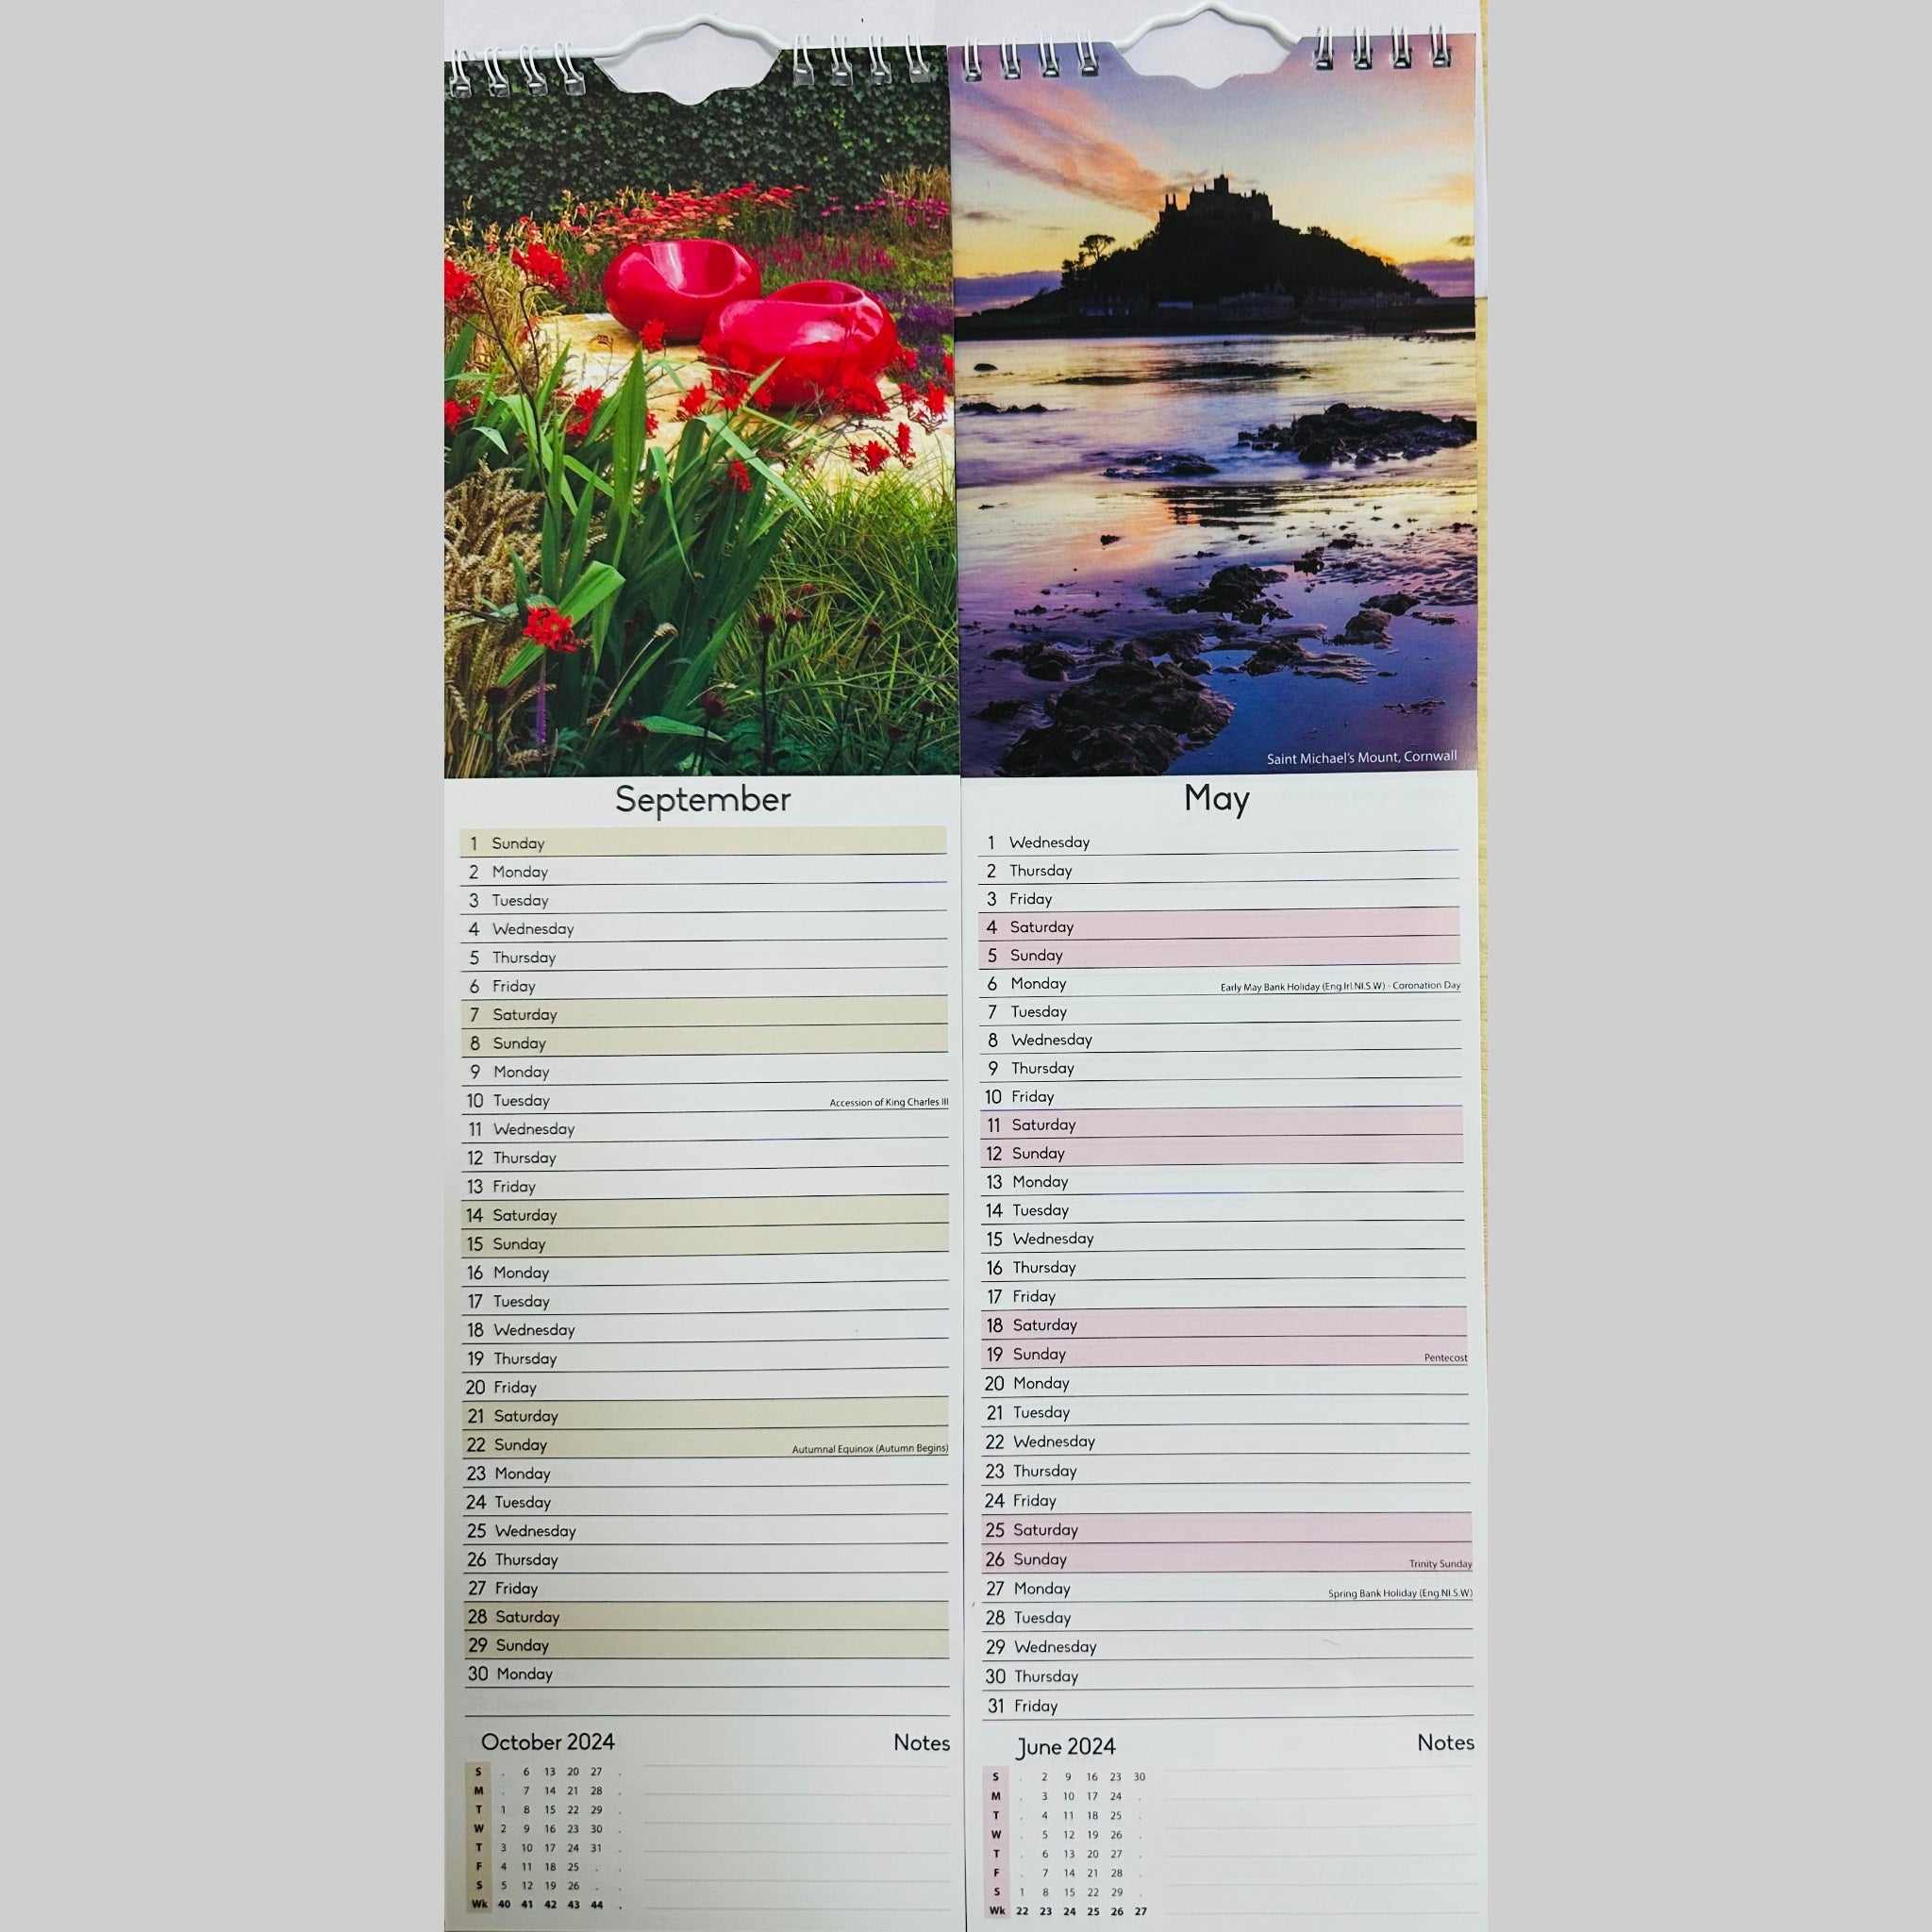 Beclen Harp Super Slim Month to View Spiral Bound Hanging Wall Calendar Home Office 2024 Dogs, Puppies, Kittens, Cats, Wildlife, Flowers, Scenes, Gardens